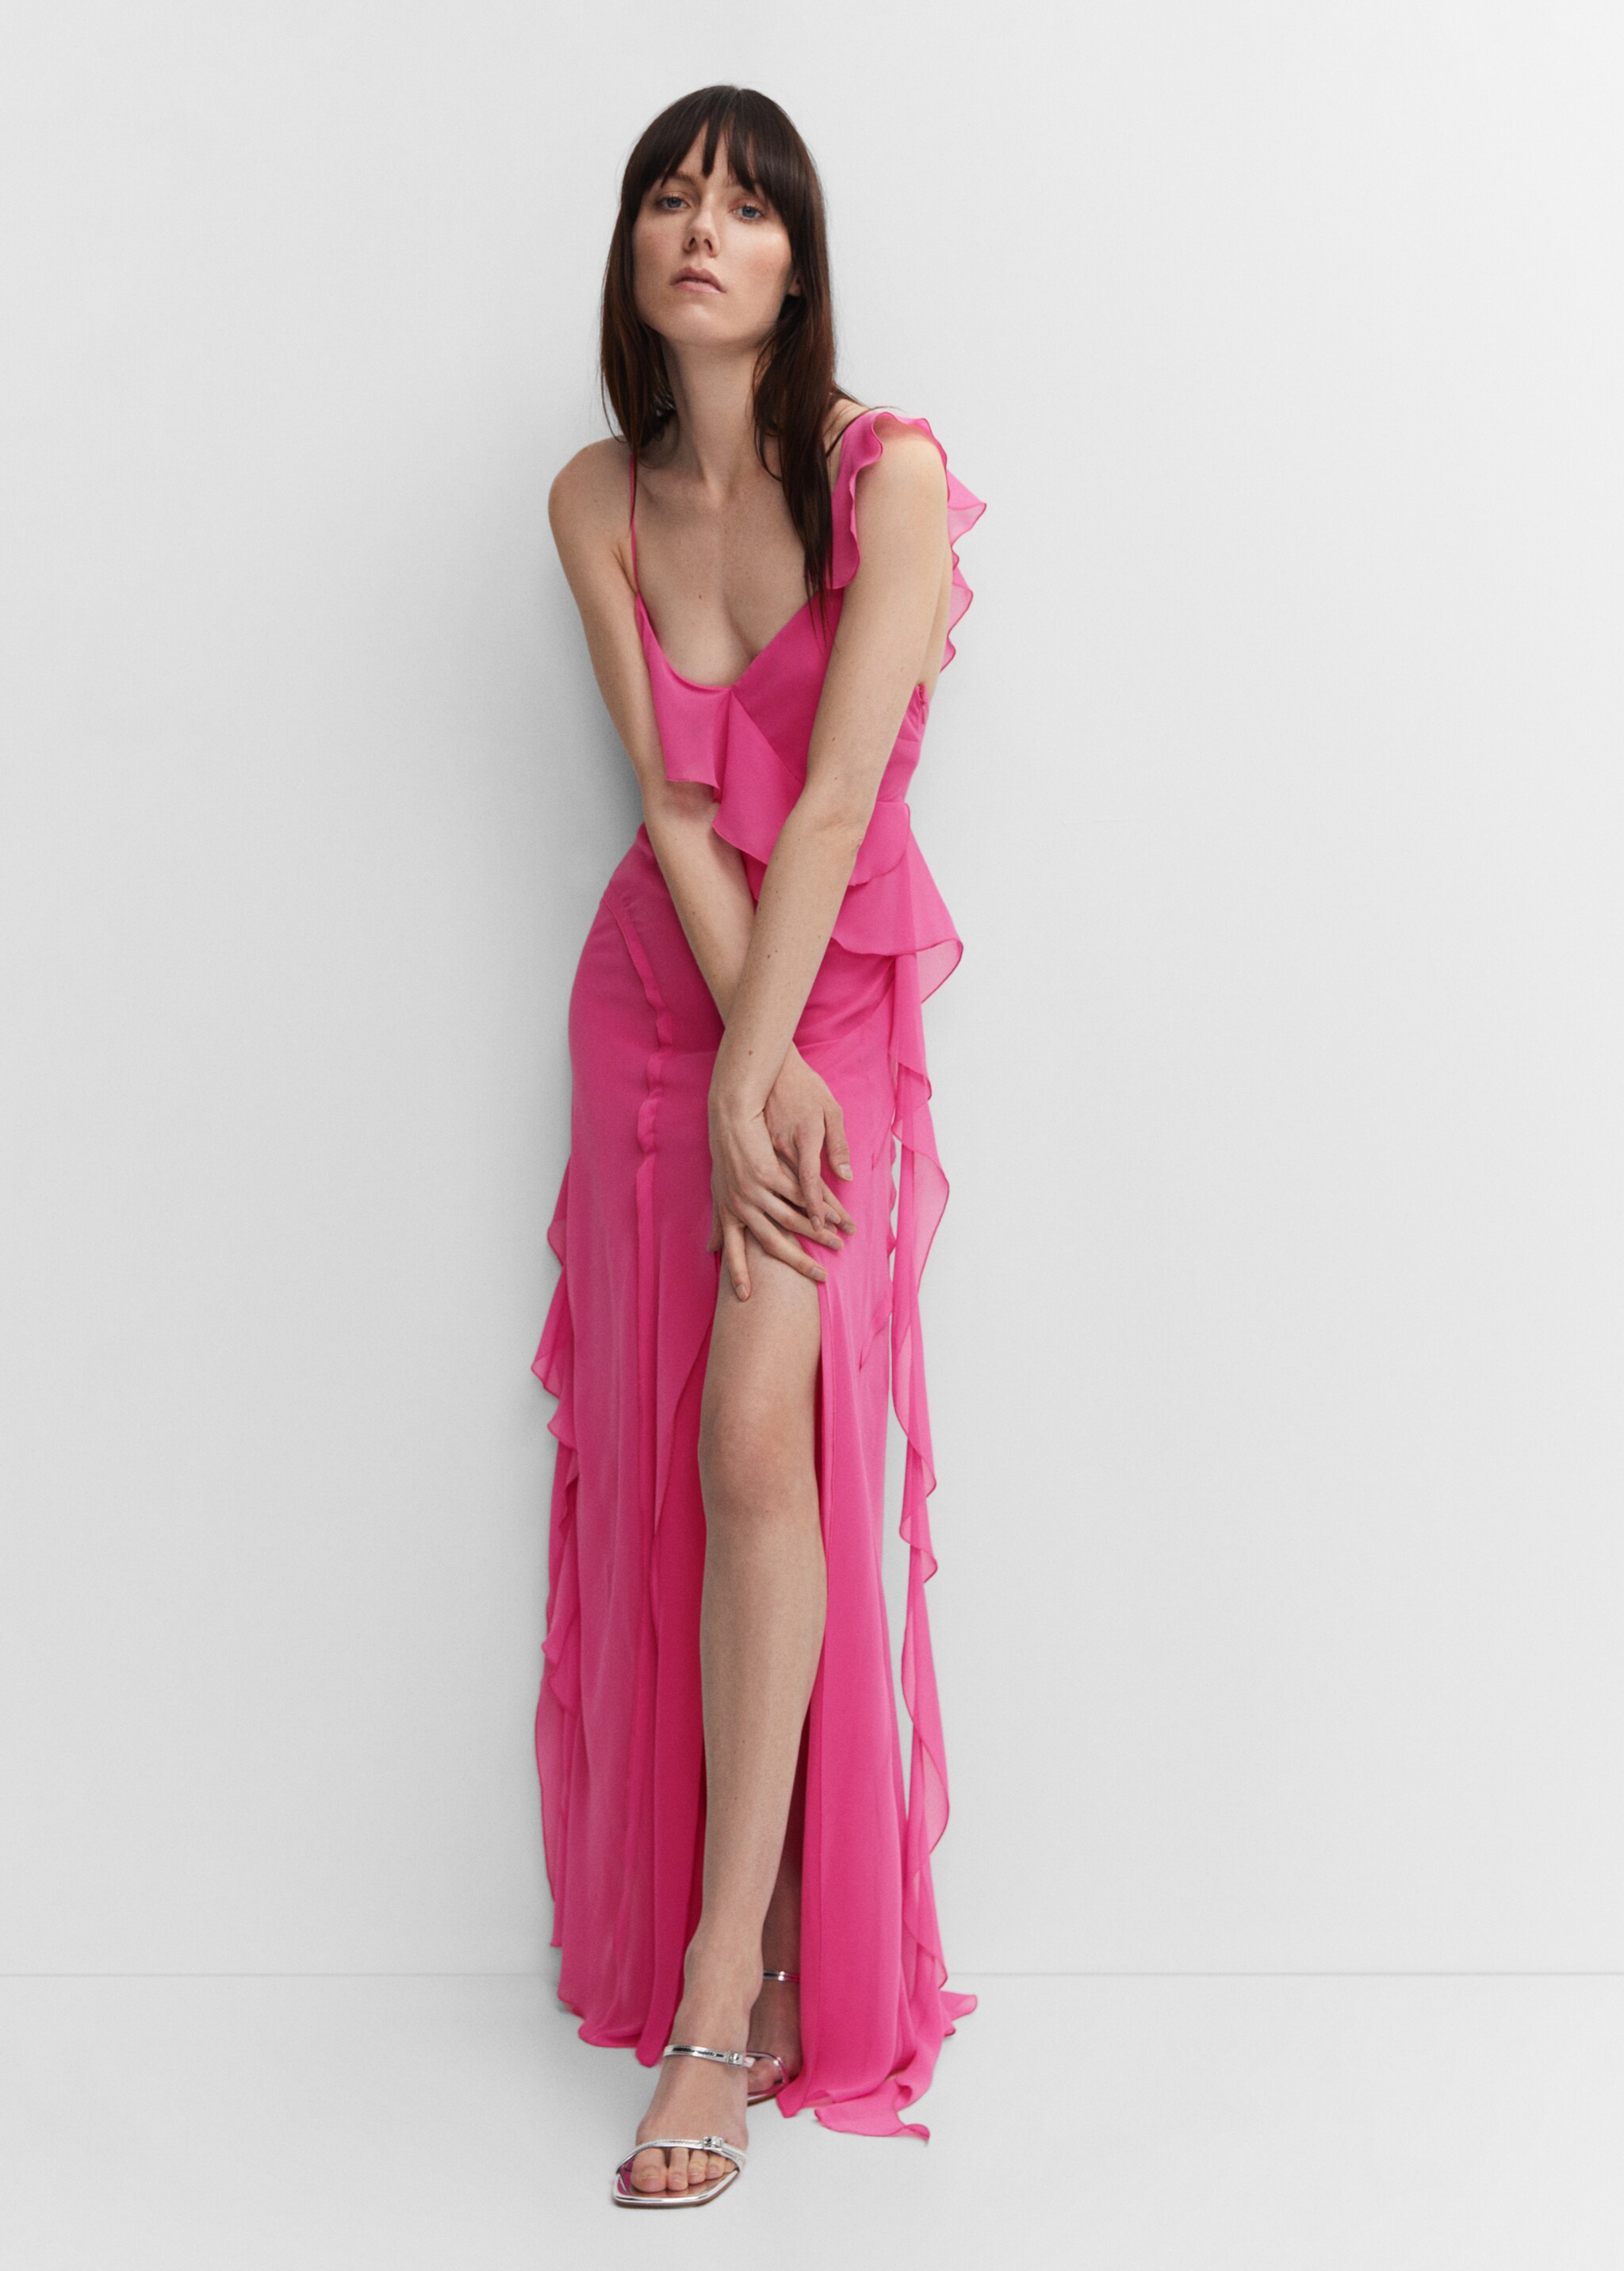 Ruffles slit dress - Details of the article 2